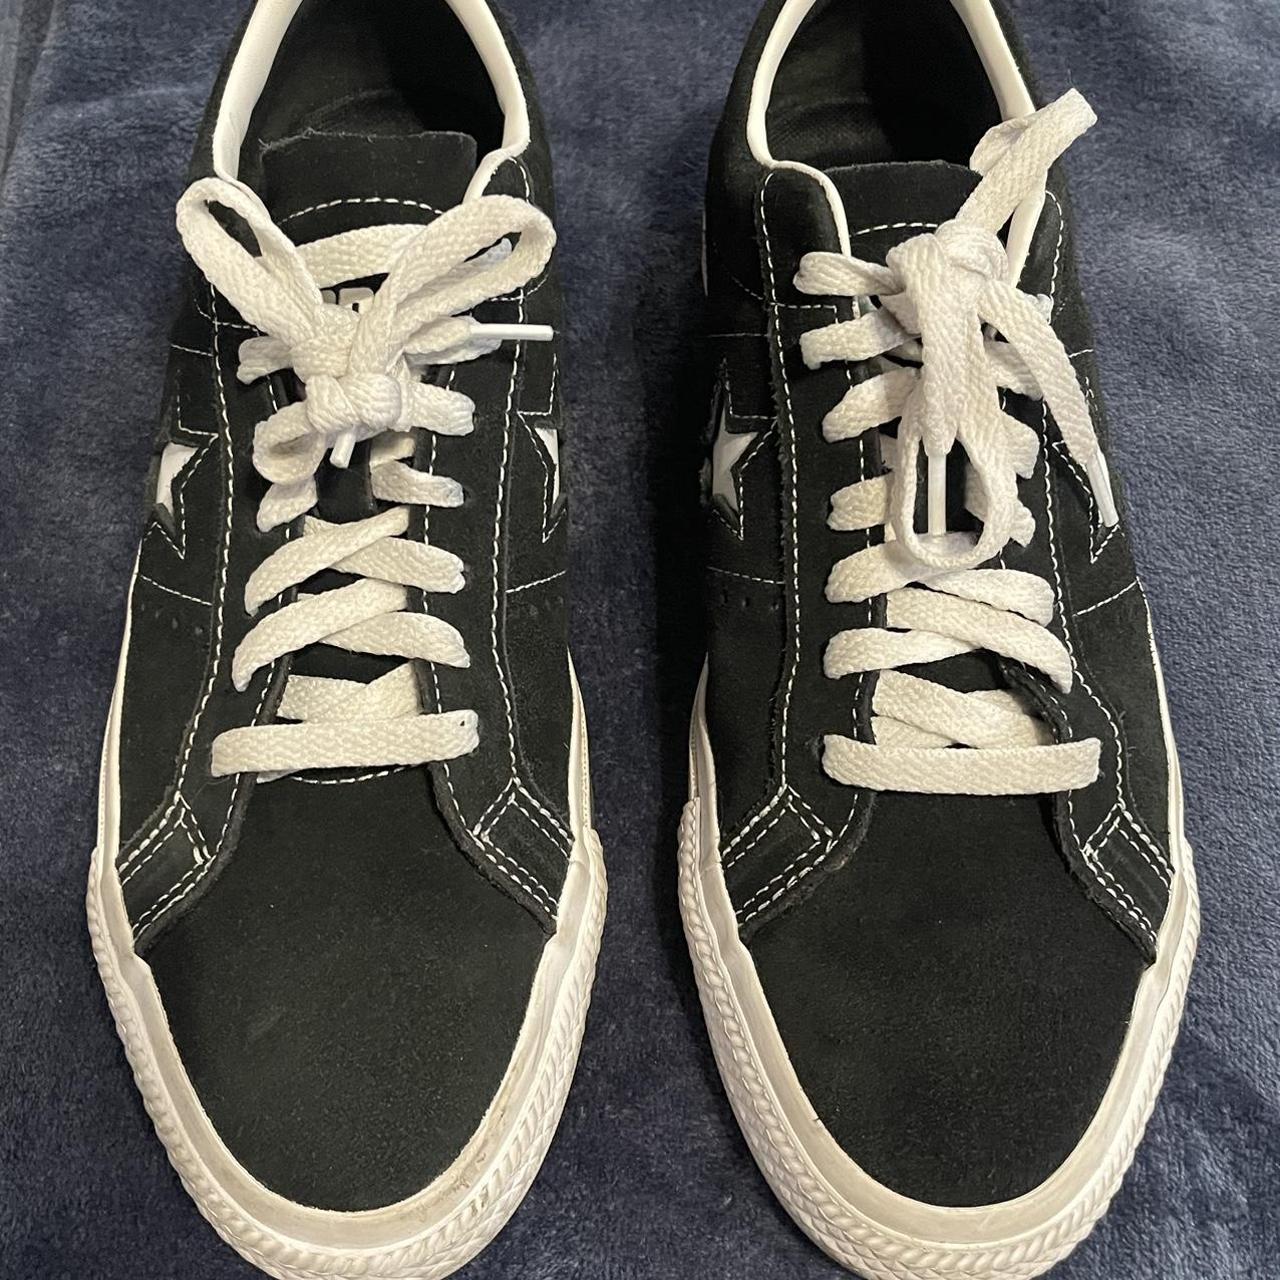 Converse Men's White and Black Trainers | Depop